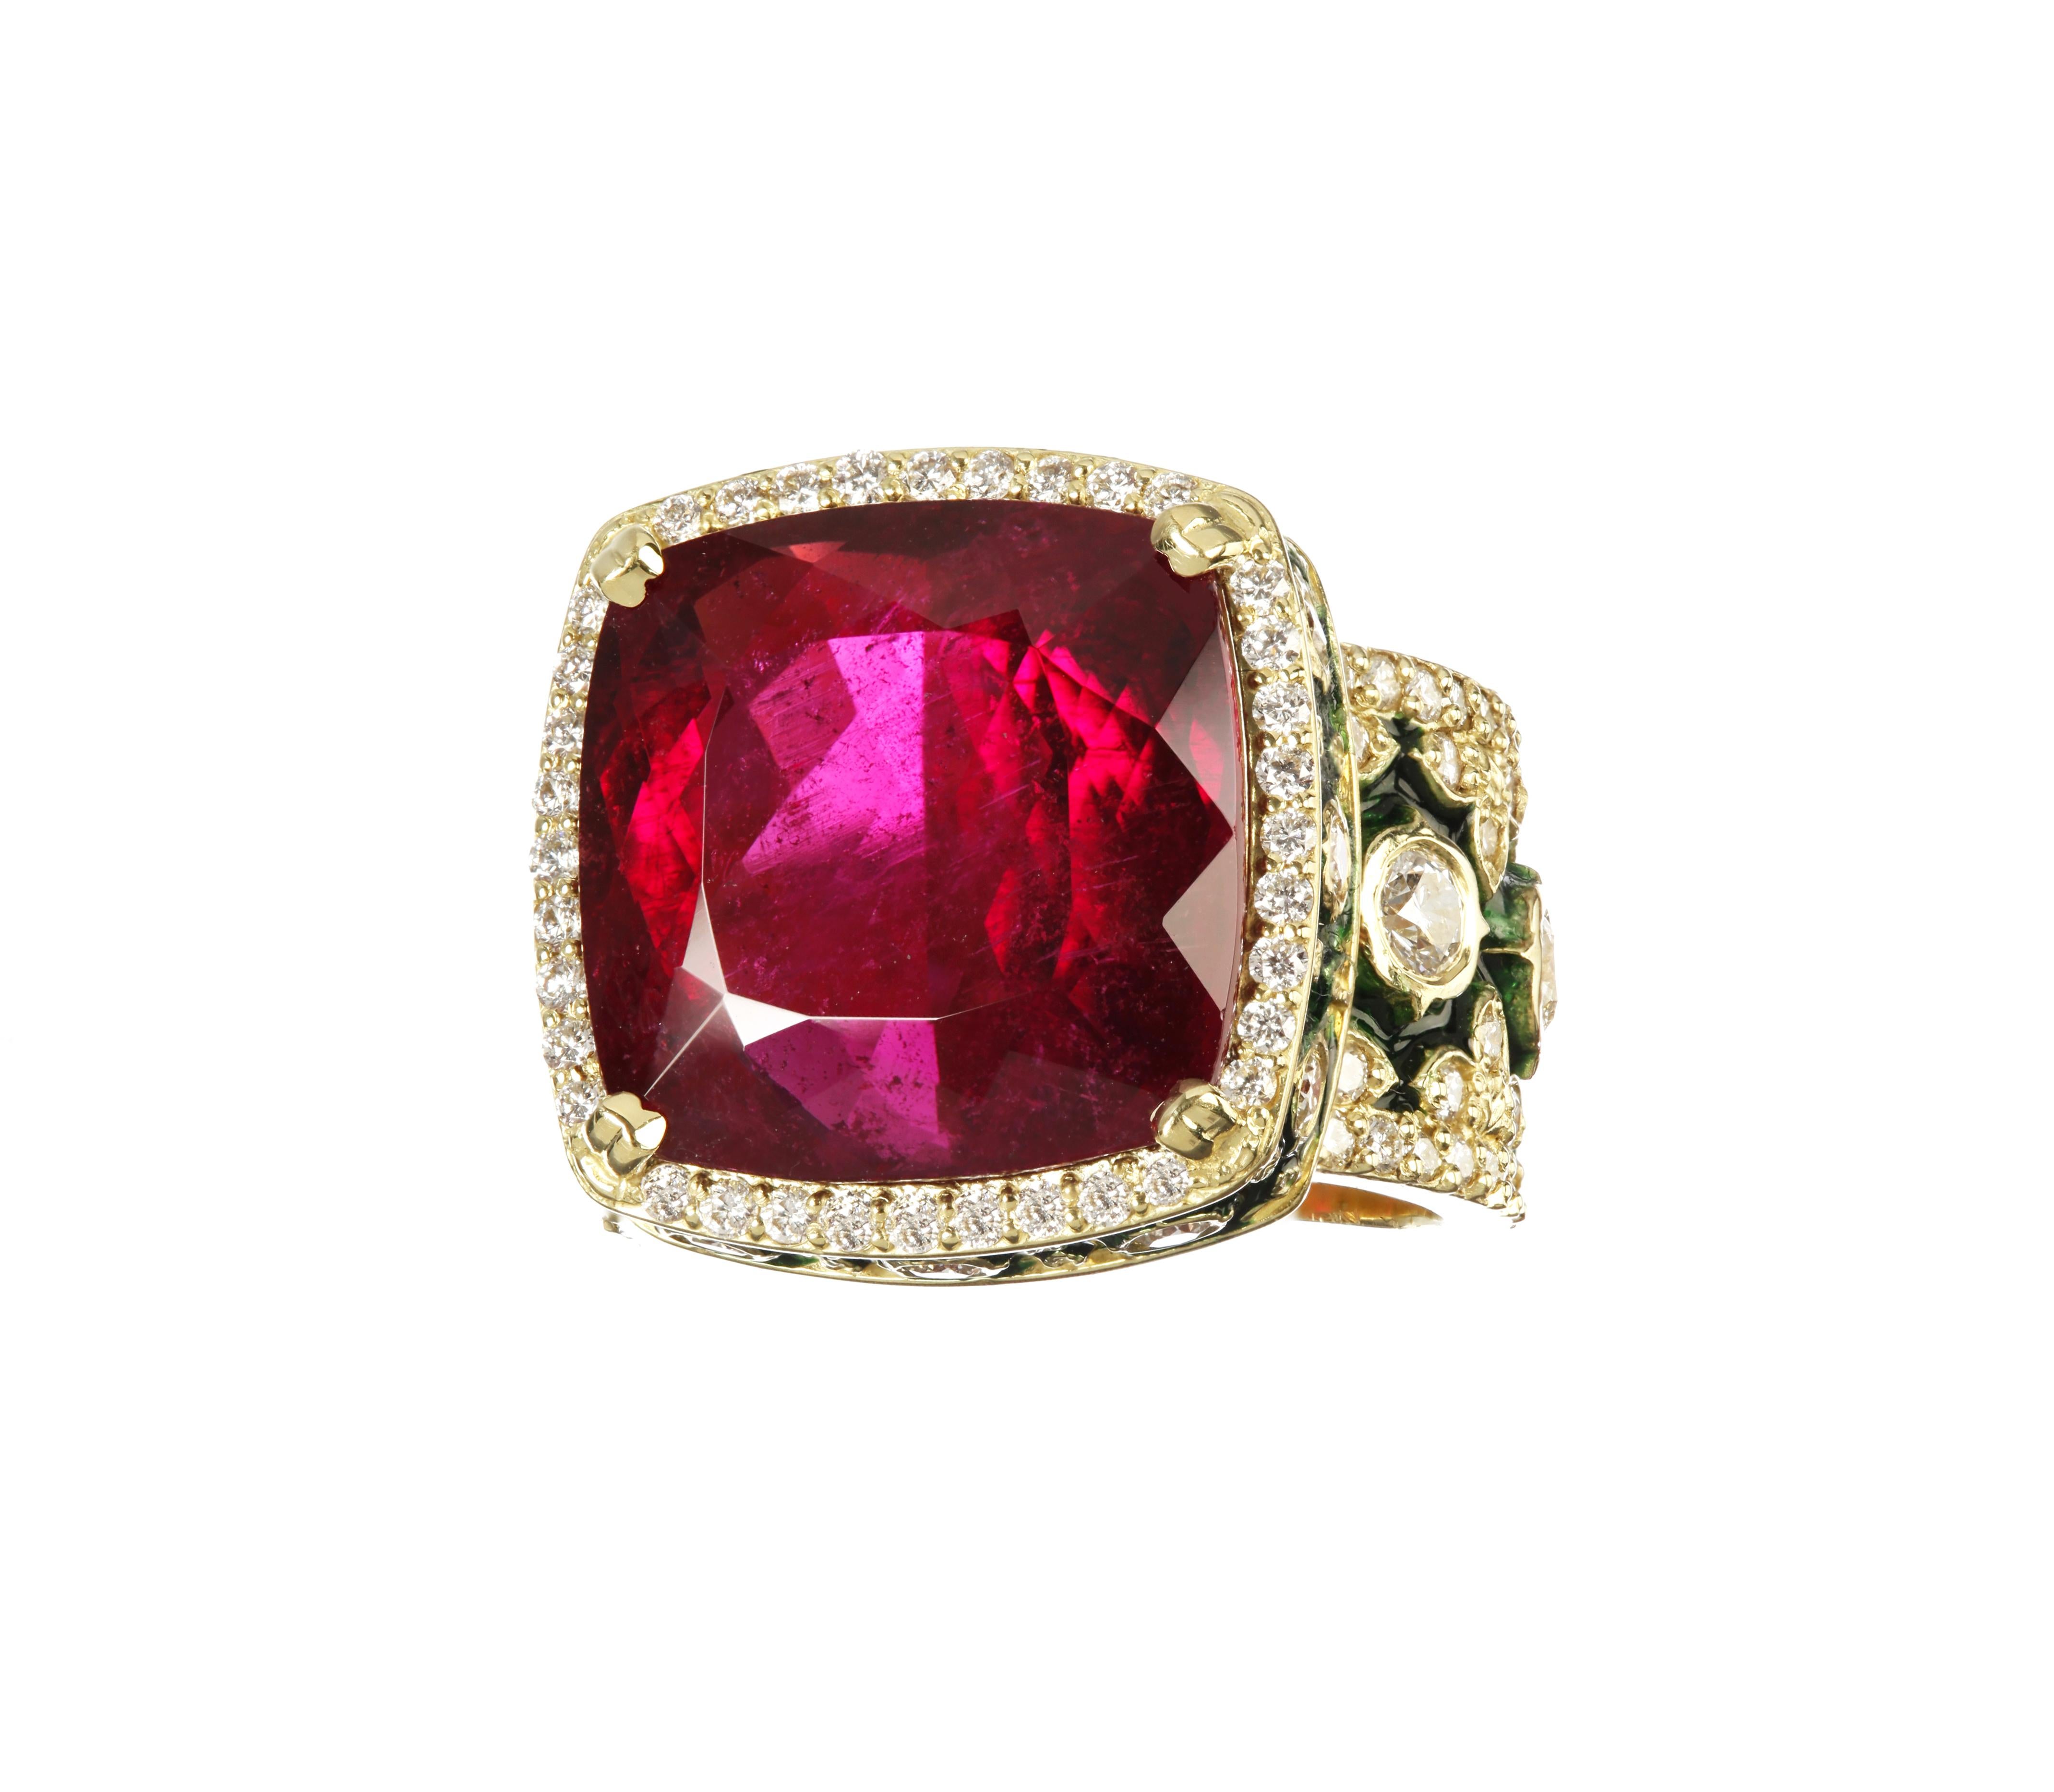 18K Yellow Gold and Diamond with Rubelite Tourmaline center and Green Enamel by Stambolian

This one-of-a-kind ring is from the 